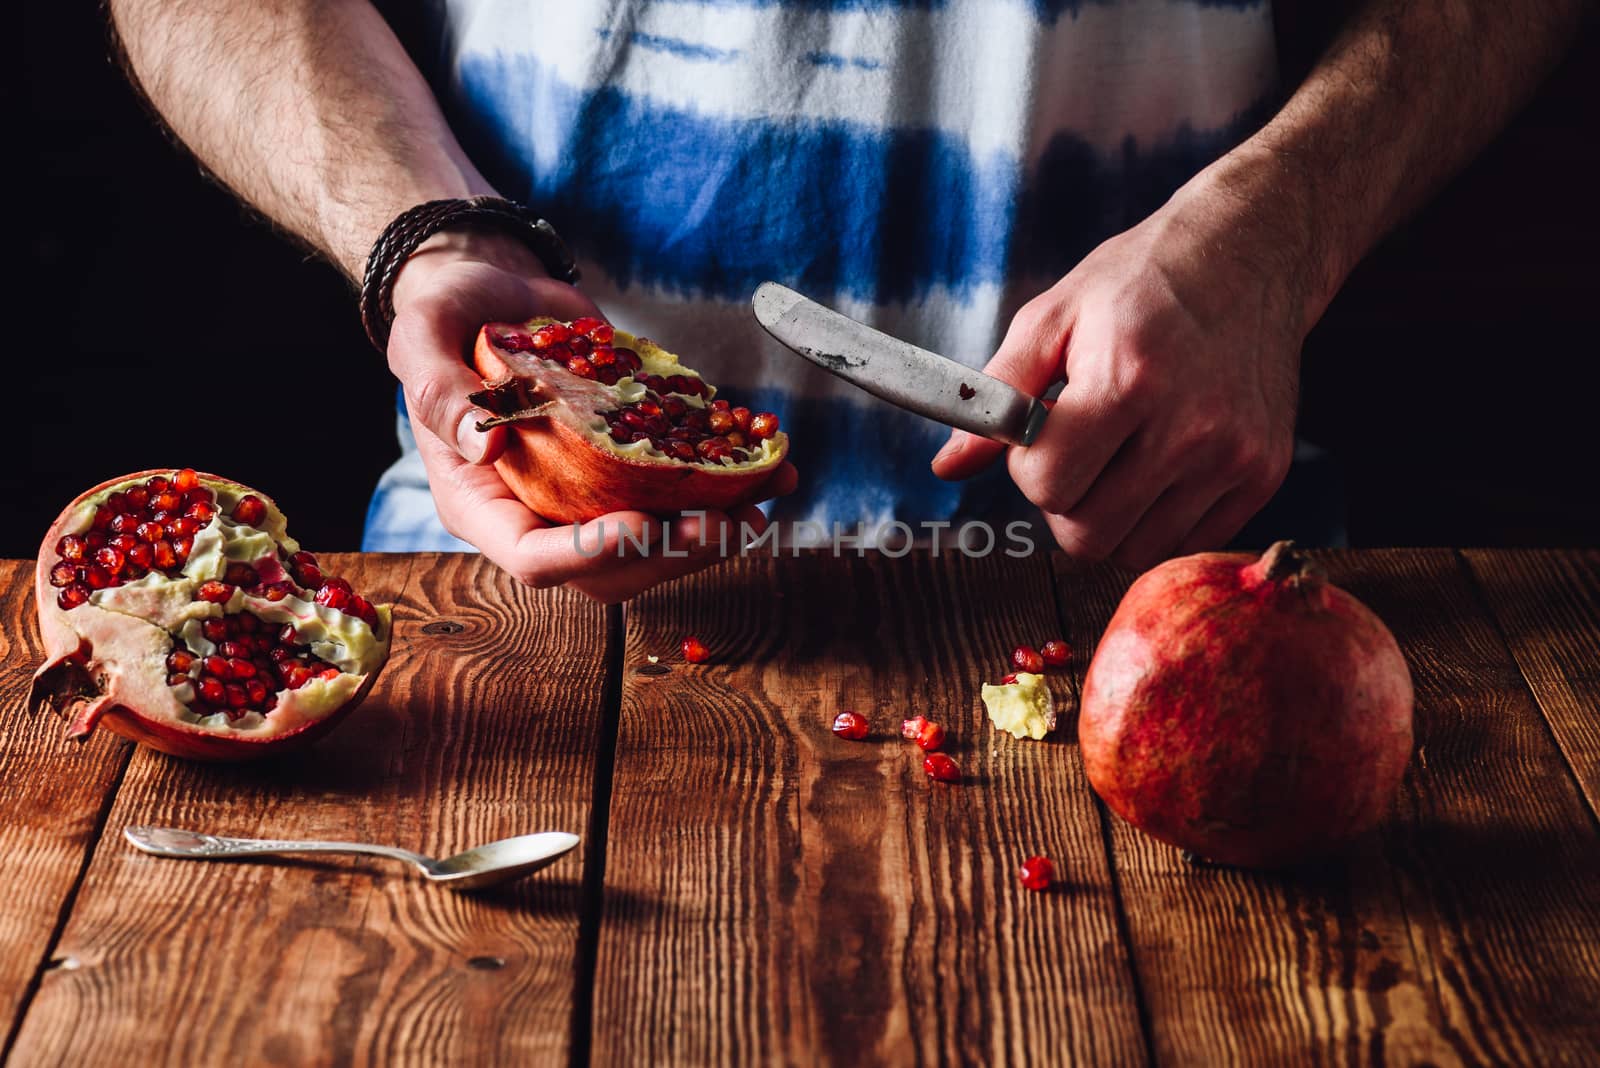 Pomegranate Half and Knife in Human Hands.